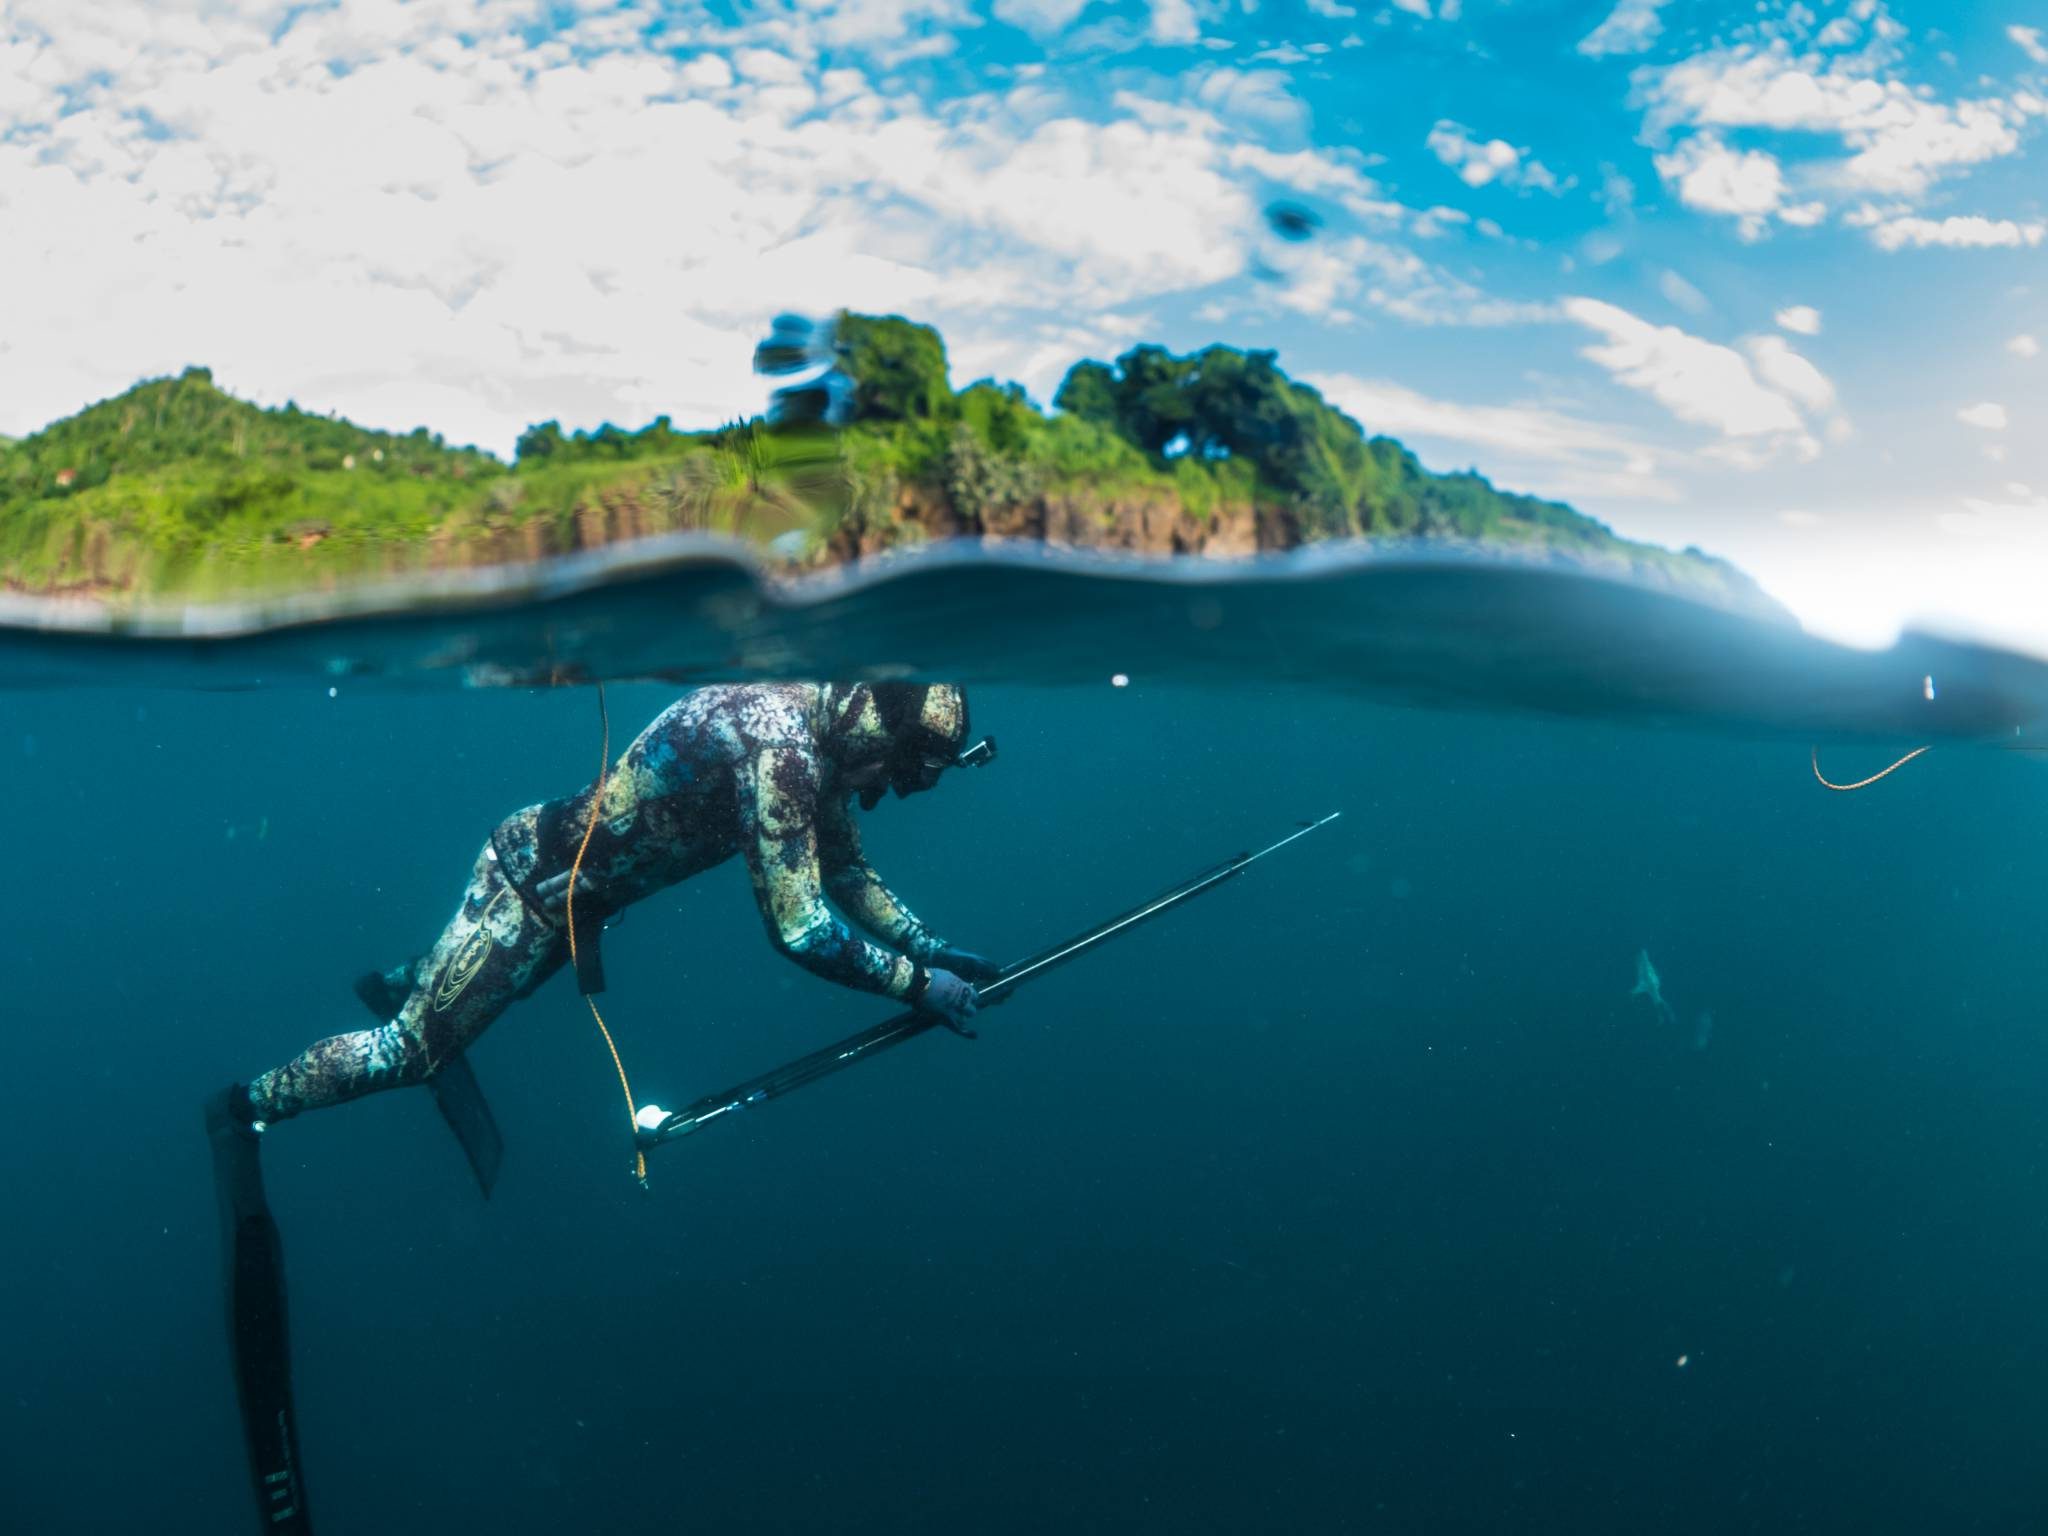 Spearfishing Bali, spearfishing bali, bali spearfishing, traditional hunting, tropical fish, what is spearfishing, amed spearfishing